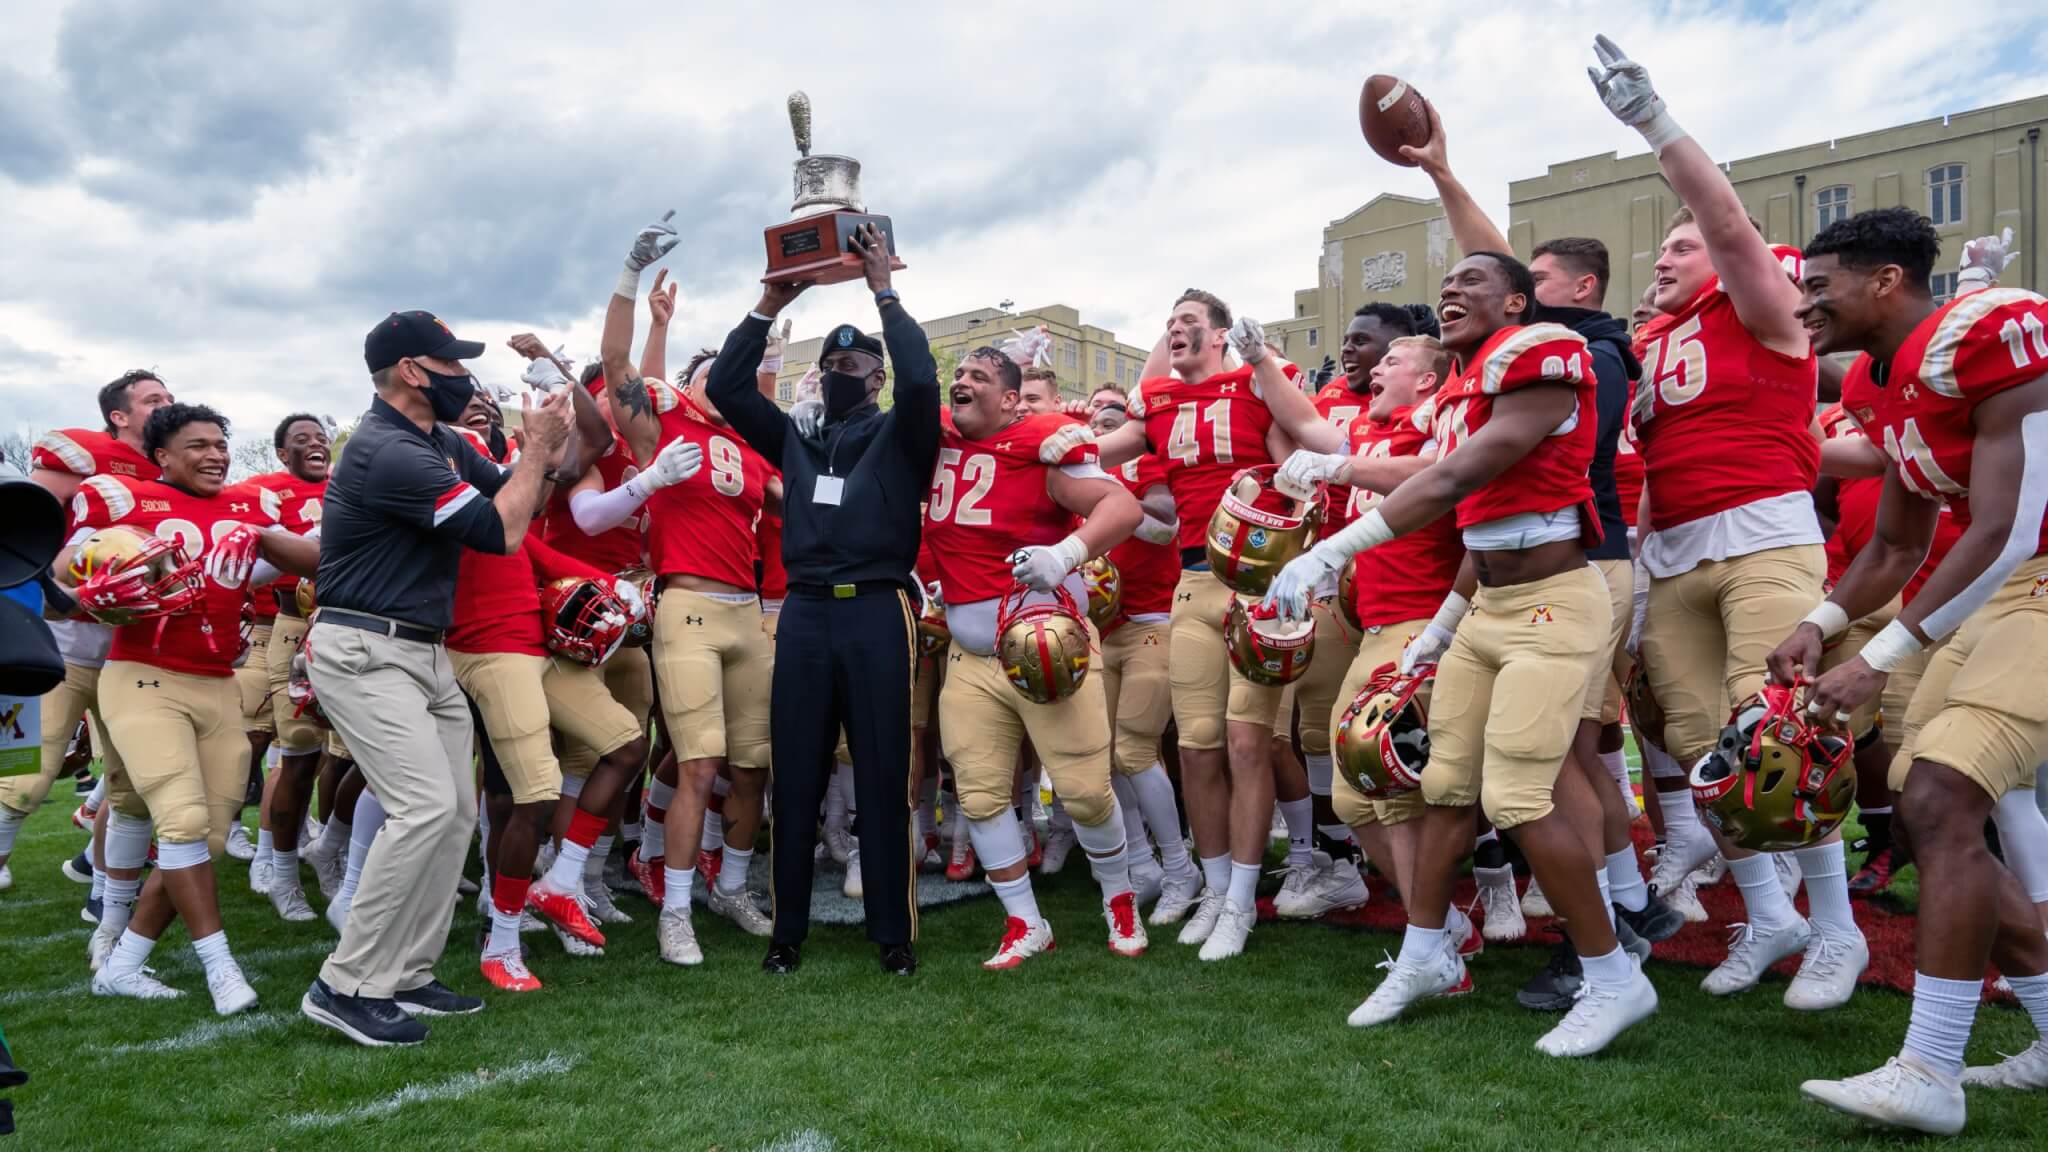 VMI defeats The Citael, 31-17, retaining the Silver Shako and capturing the 20-21 Southern Conference football championship. Photo by Chuck Steenburgh.